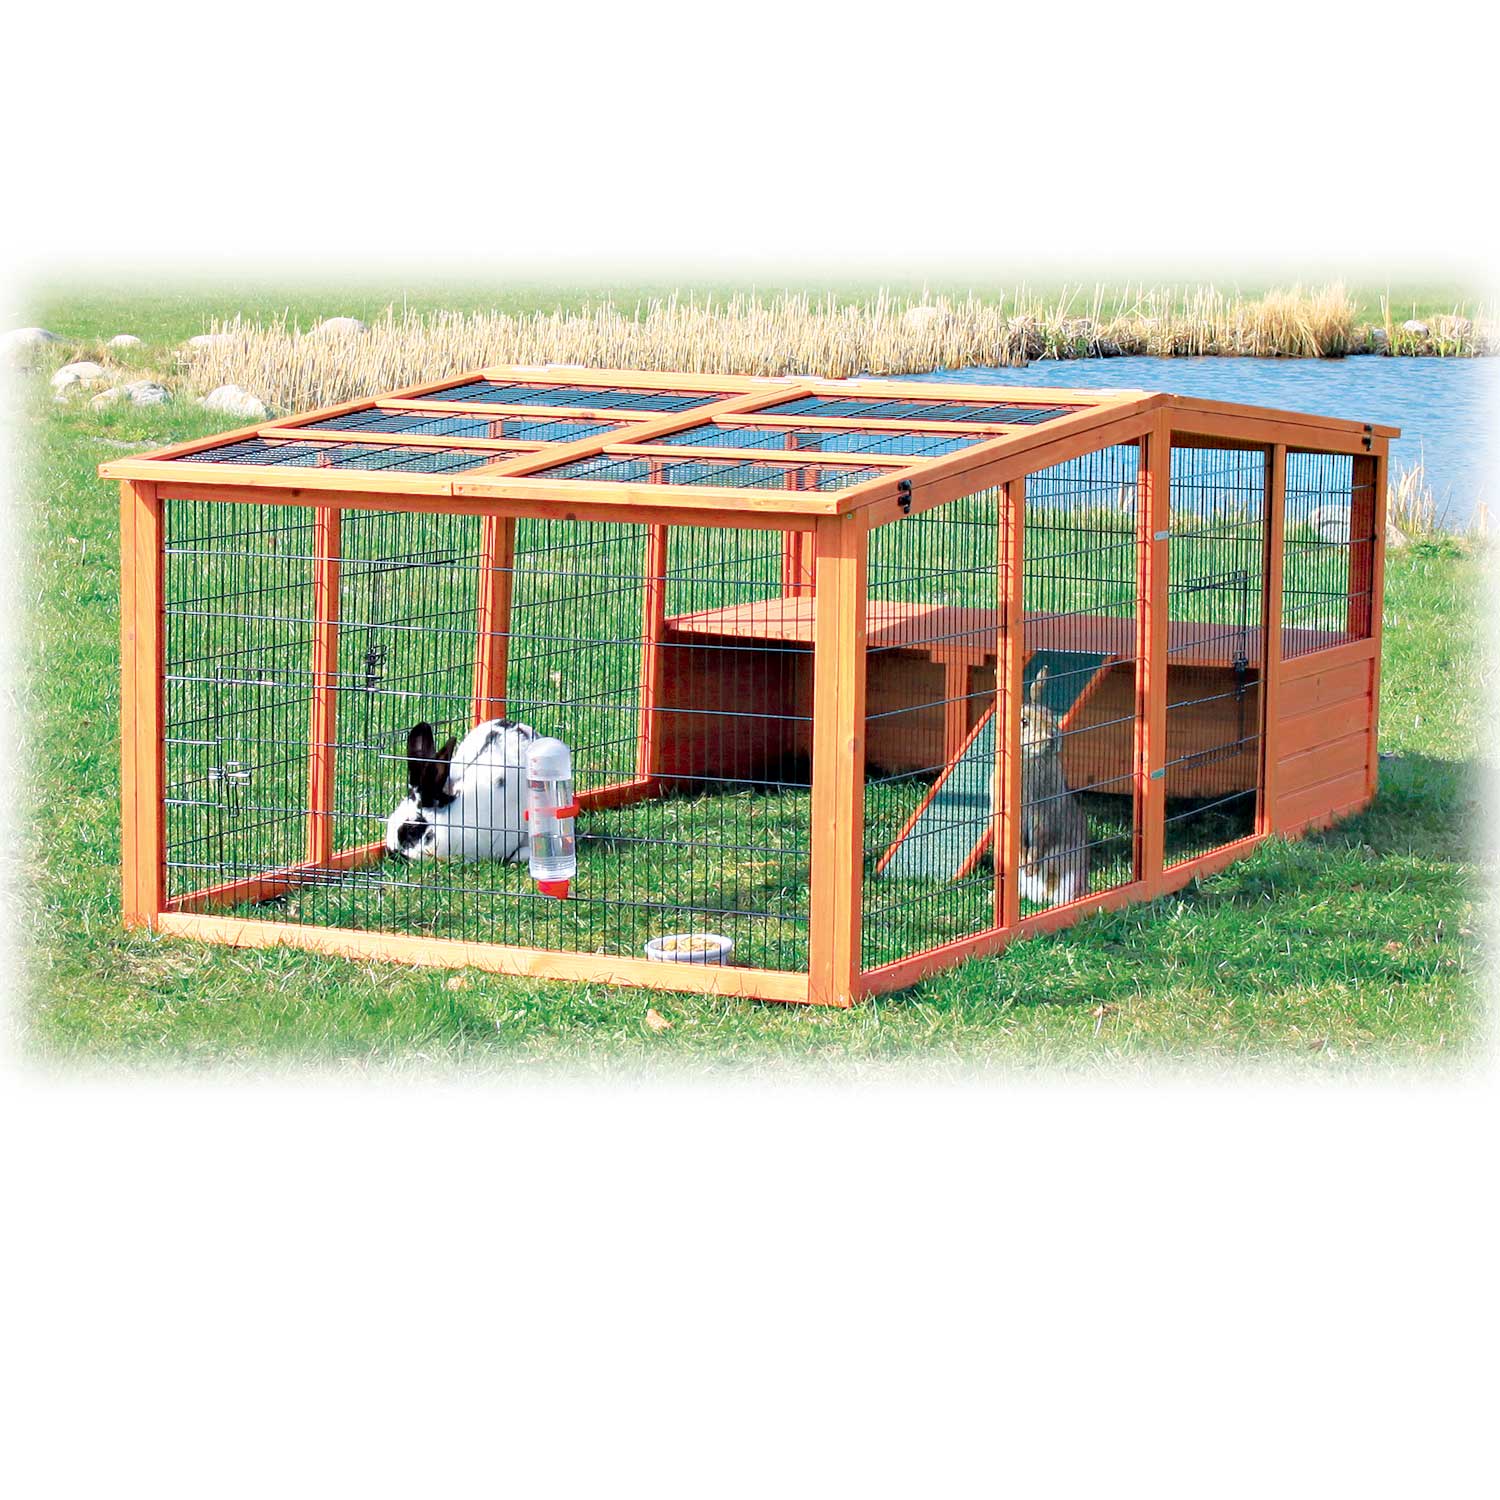 TRIXIE Natura Peaked Roof Outdoor Rabbit Run with Shelter